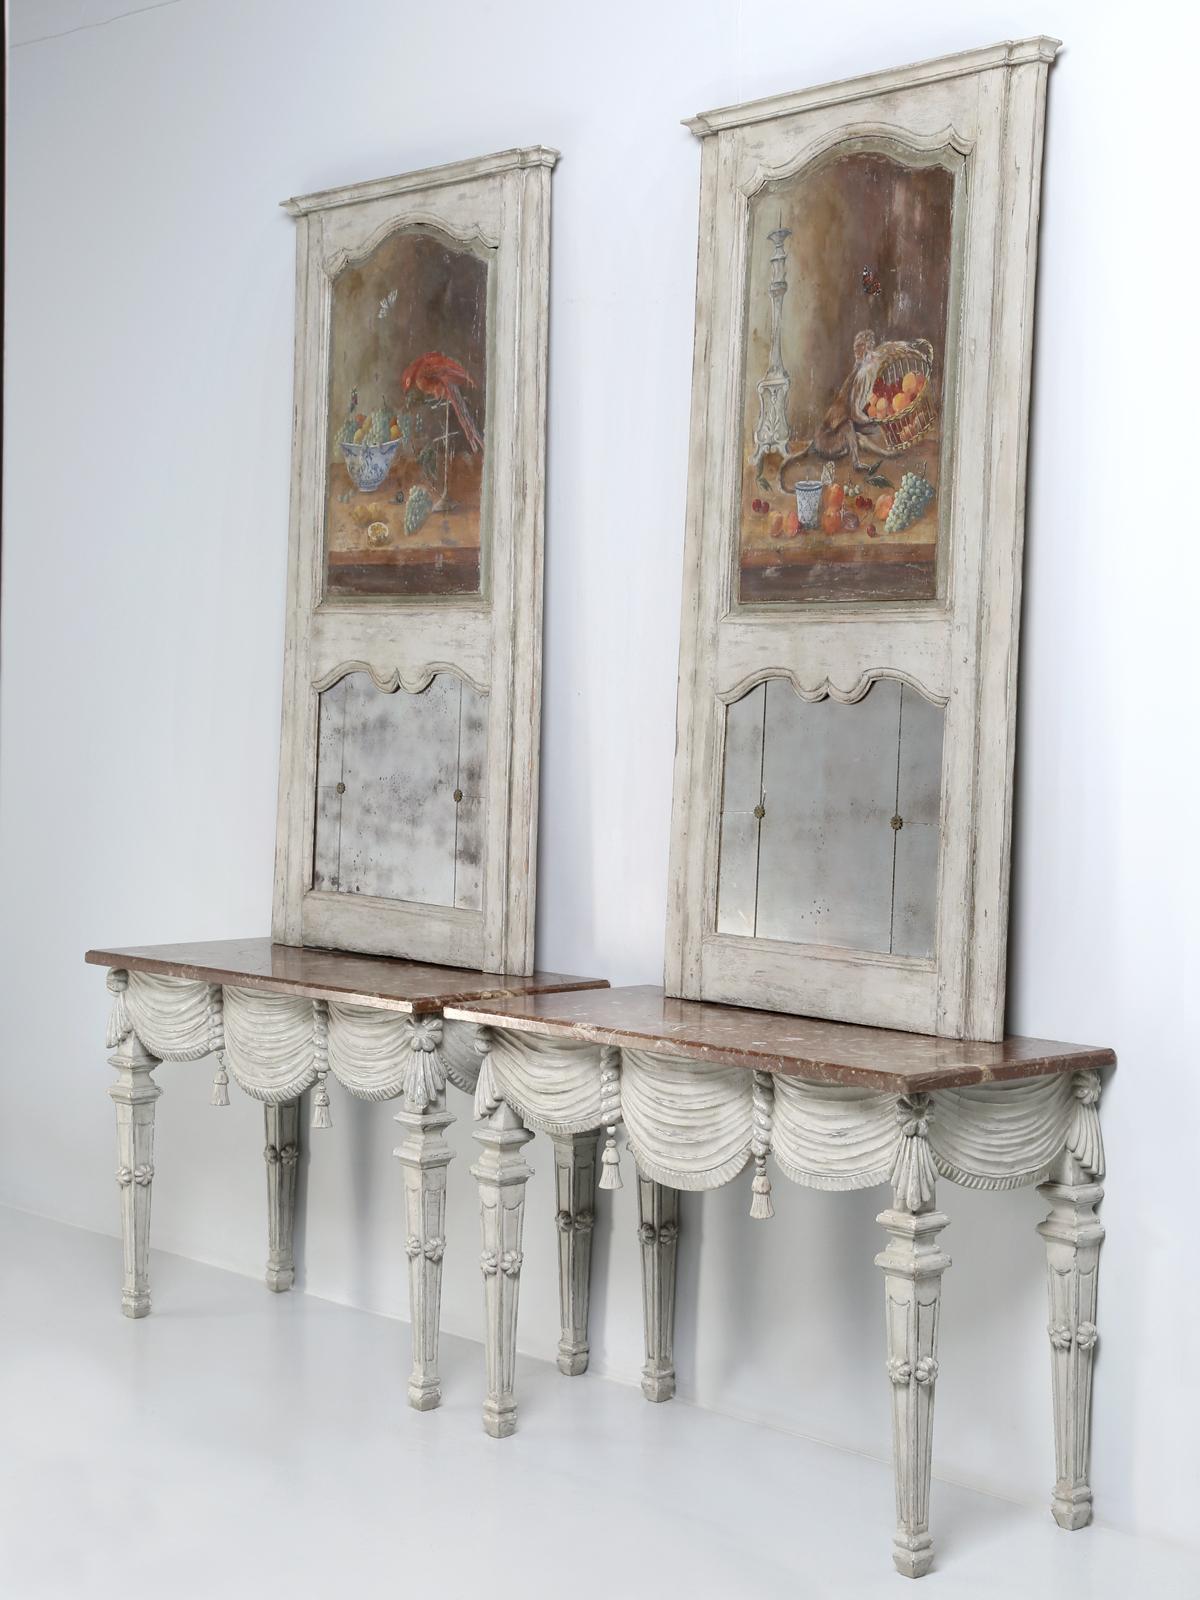 Pair of Italian console tables with trumeau mirrors. We have been importing from Europe for almost 30-years now and every once in a while, you get stumped about an item’s history or what it really is? Well, as hard as we look, we are completely